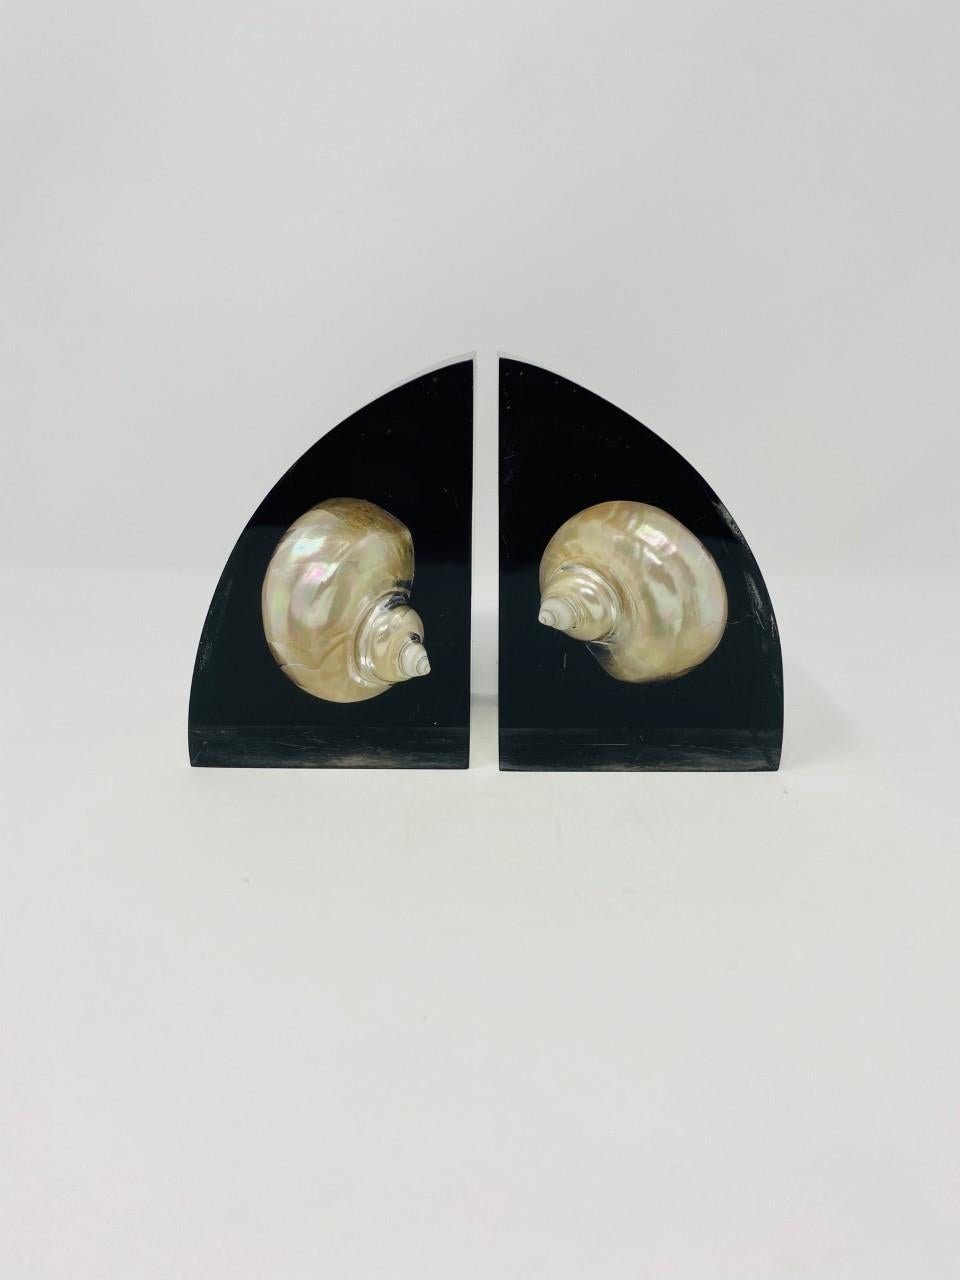 Beautiful vintage mid century lucite bookends with embedded shell. These 1960s gems are glamorous, lustrous and enigmatic. Two perfectly proportioned seashell specimens float in lucite that projects them in a dark background. The iridescent natural